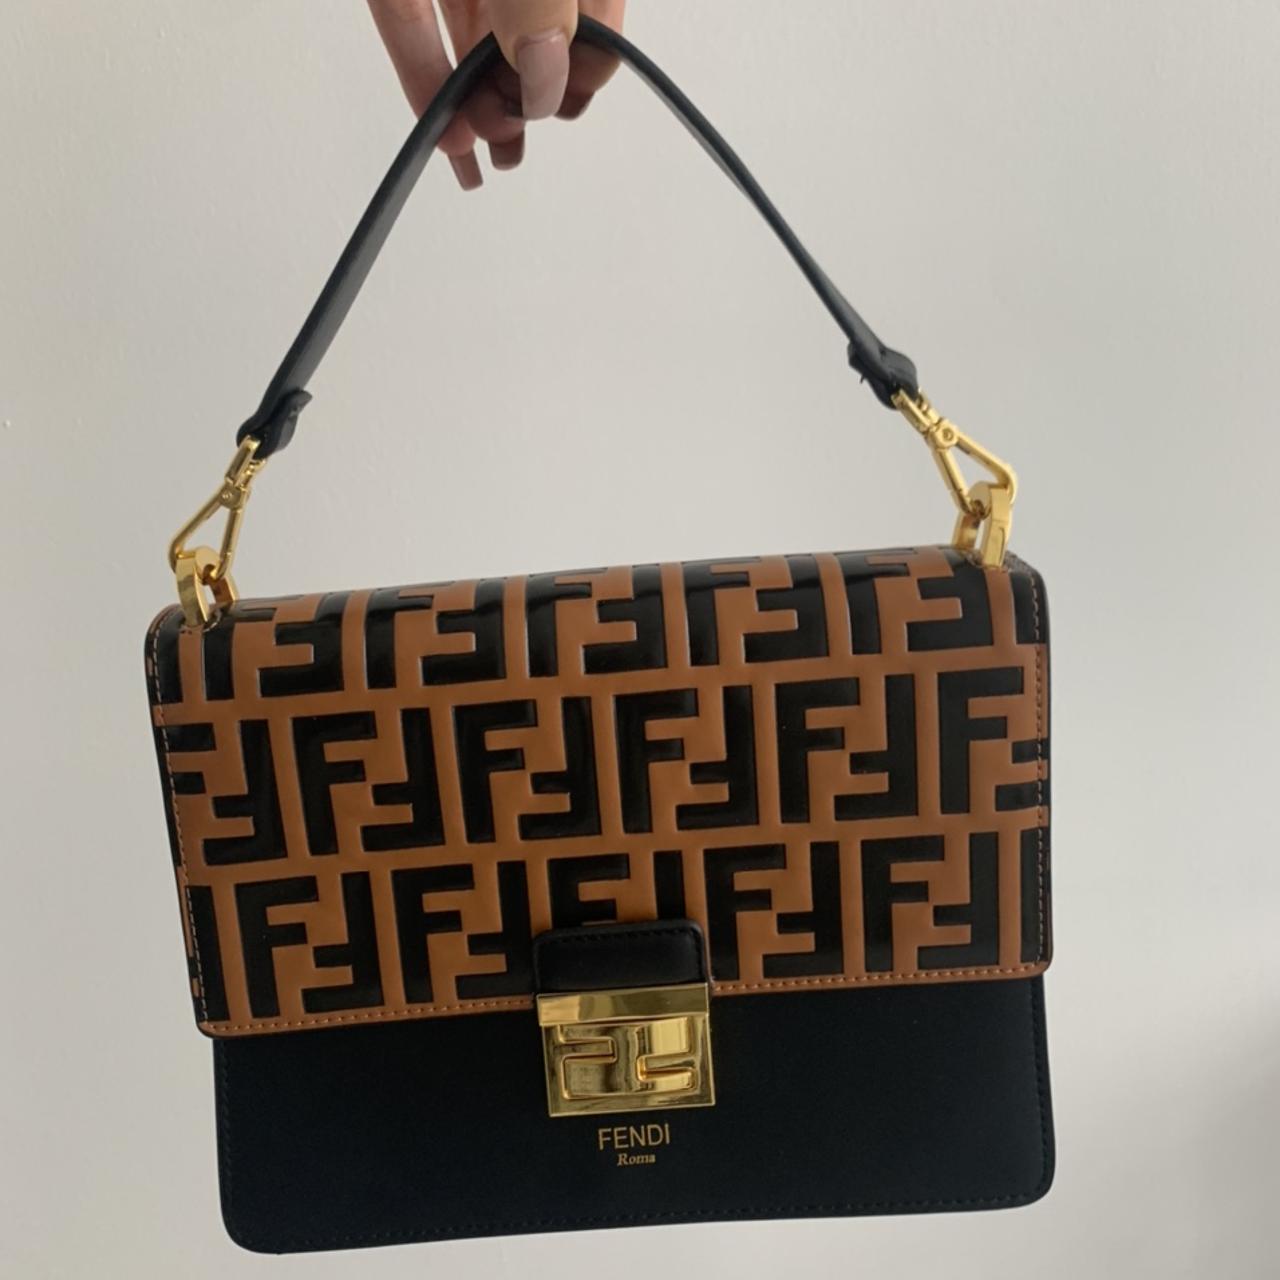 Fendi bag PRICE REDUCED Comes with two straps as... - Depop